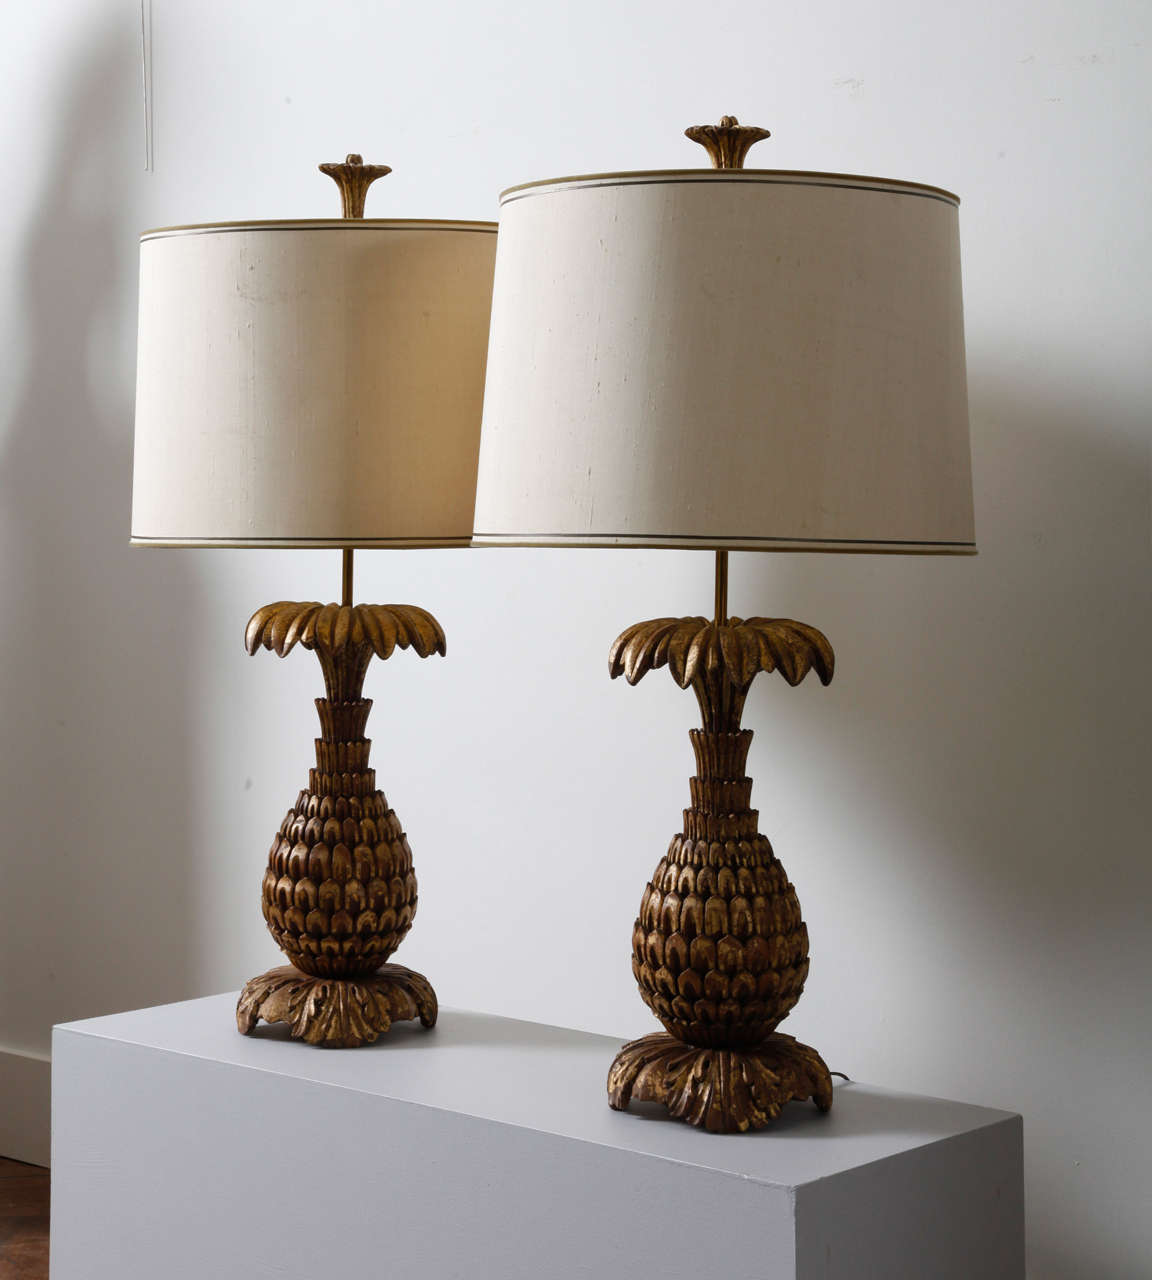 Pair of decorative two light table lamps with a gilt wooden base in the shape of a pineapple. A lampshade in wild silk fabric is arranged on the brass mainstay and a power cord under the base. 
		
Total H. 38.98 inches (99 cm); pineapple base H.